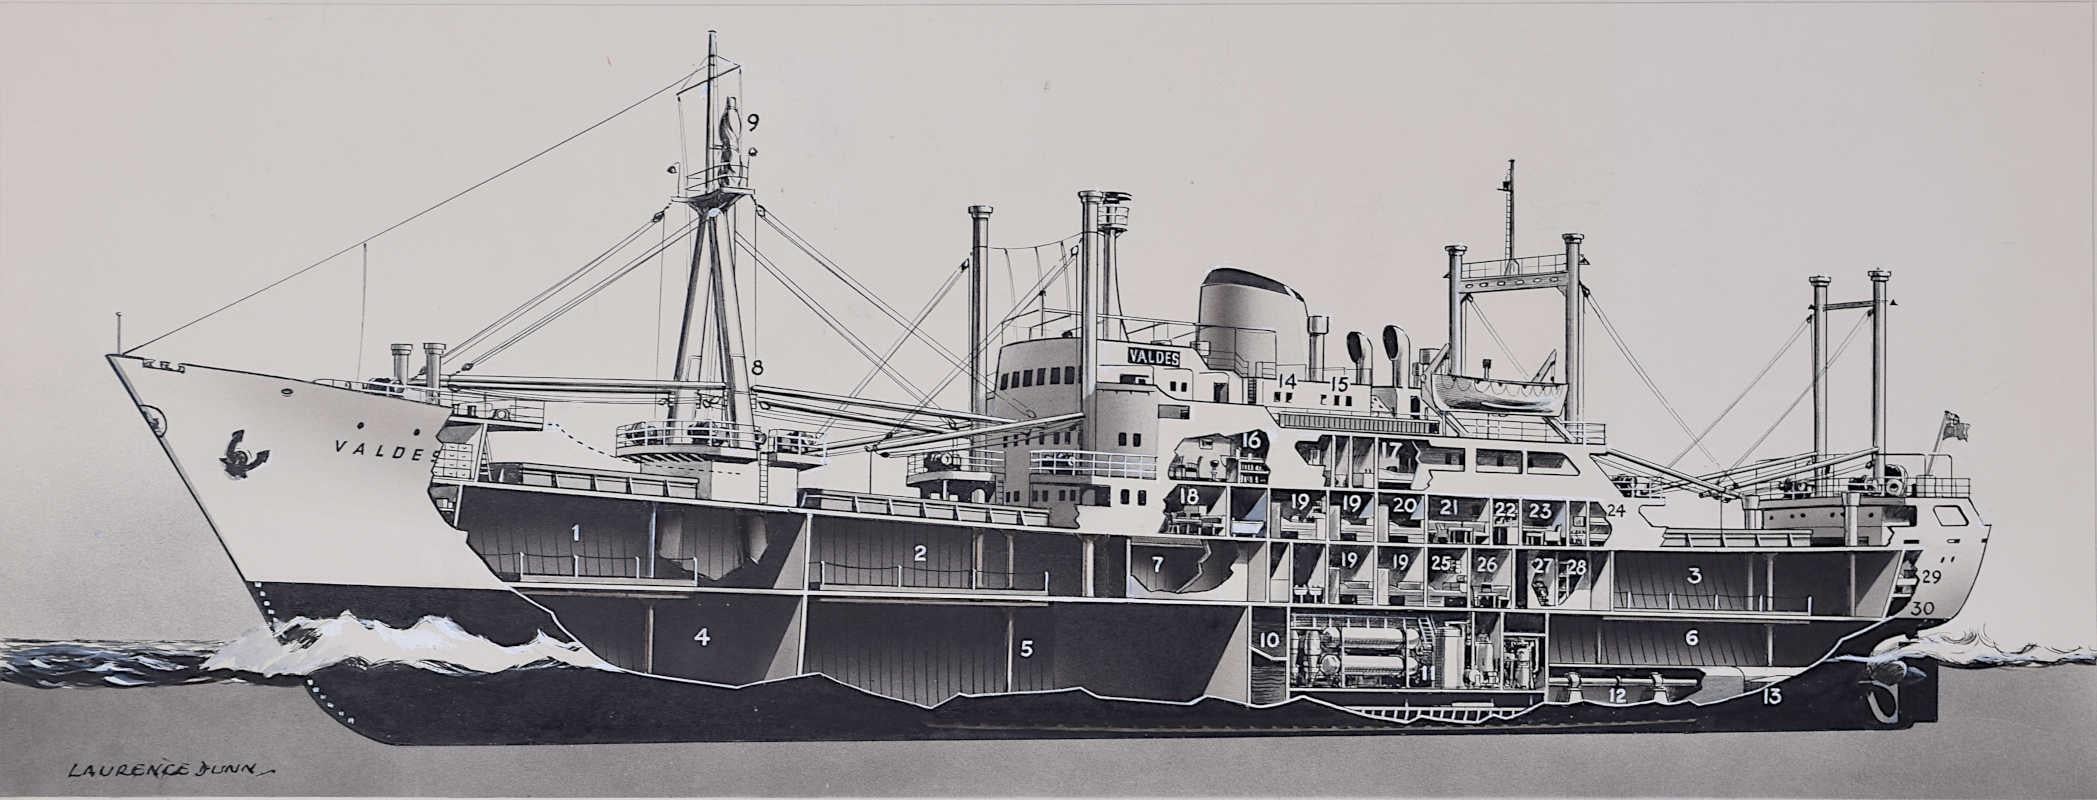 We acquired a series of marine works from Laurence Dunn's Archives. To find more scroll down to "More from this Seller" and below it click on "See all from this seller." 

Laurence Dunn (1910-2006)
VALDES (General Cargo Ship)
Bodycolour and ink
19.5